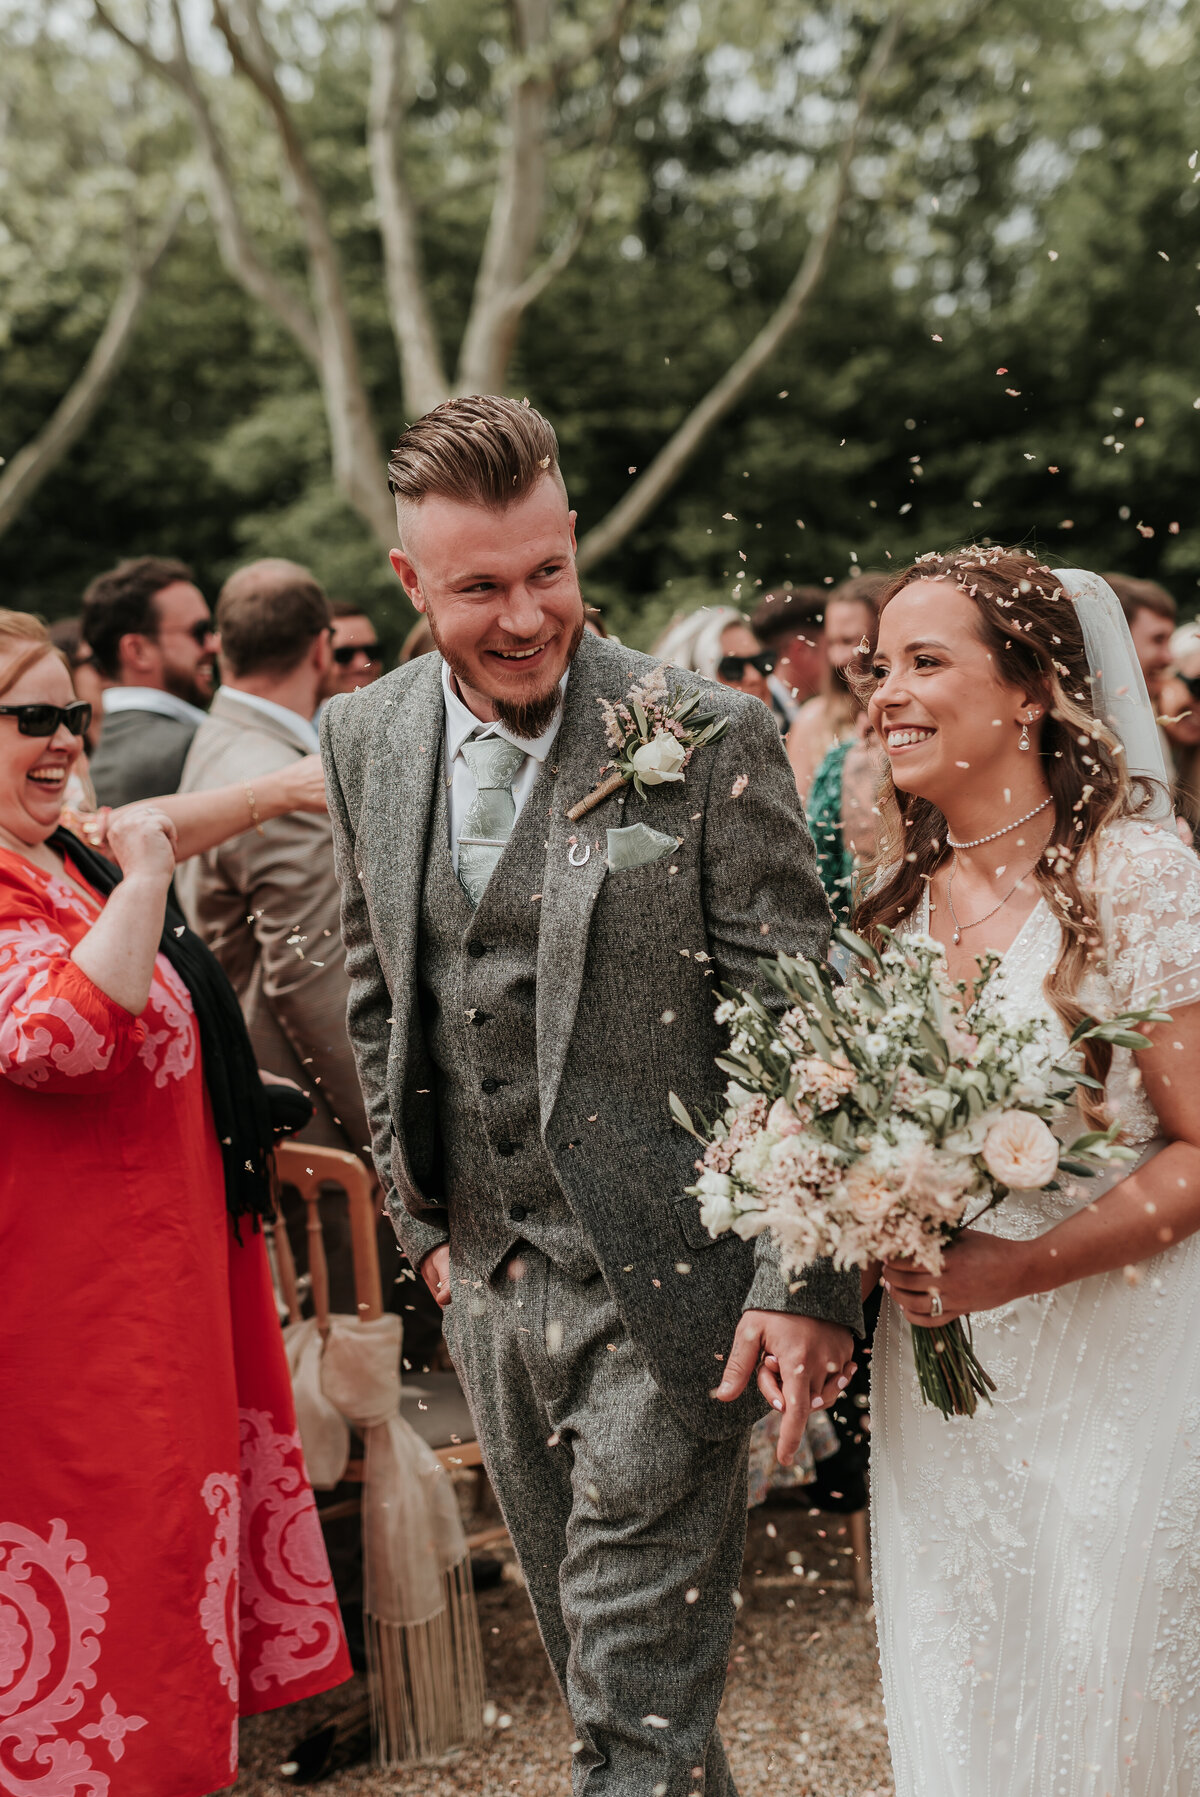 Smiling Bride & Groom showered with confetti at their relaxed spring wedding at Bury Court Barn, Farnham